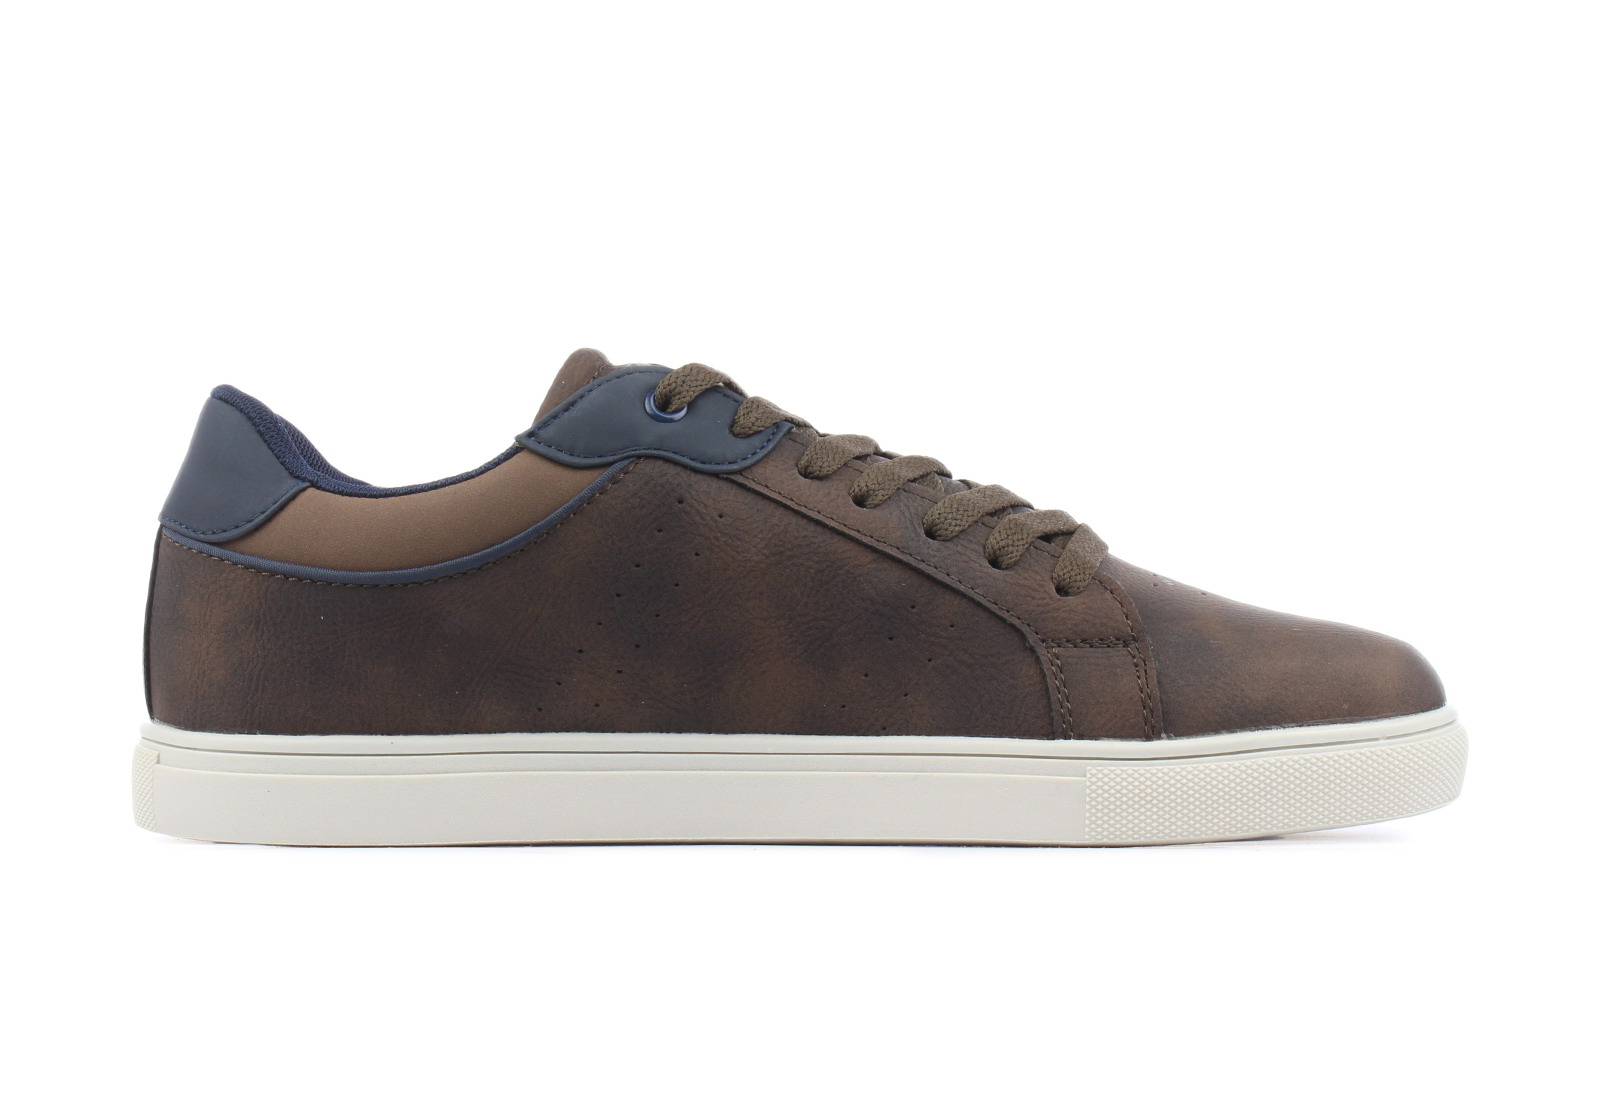 US Polo Assn Trainers - Curt2 - 4244S0Y3-brw - Online shop for sneakers ...